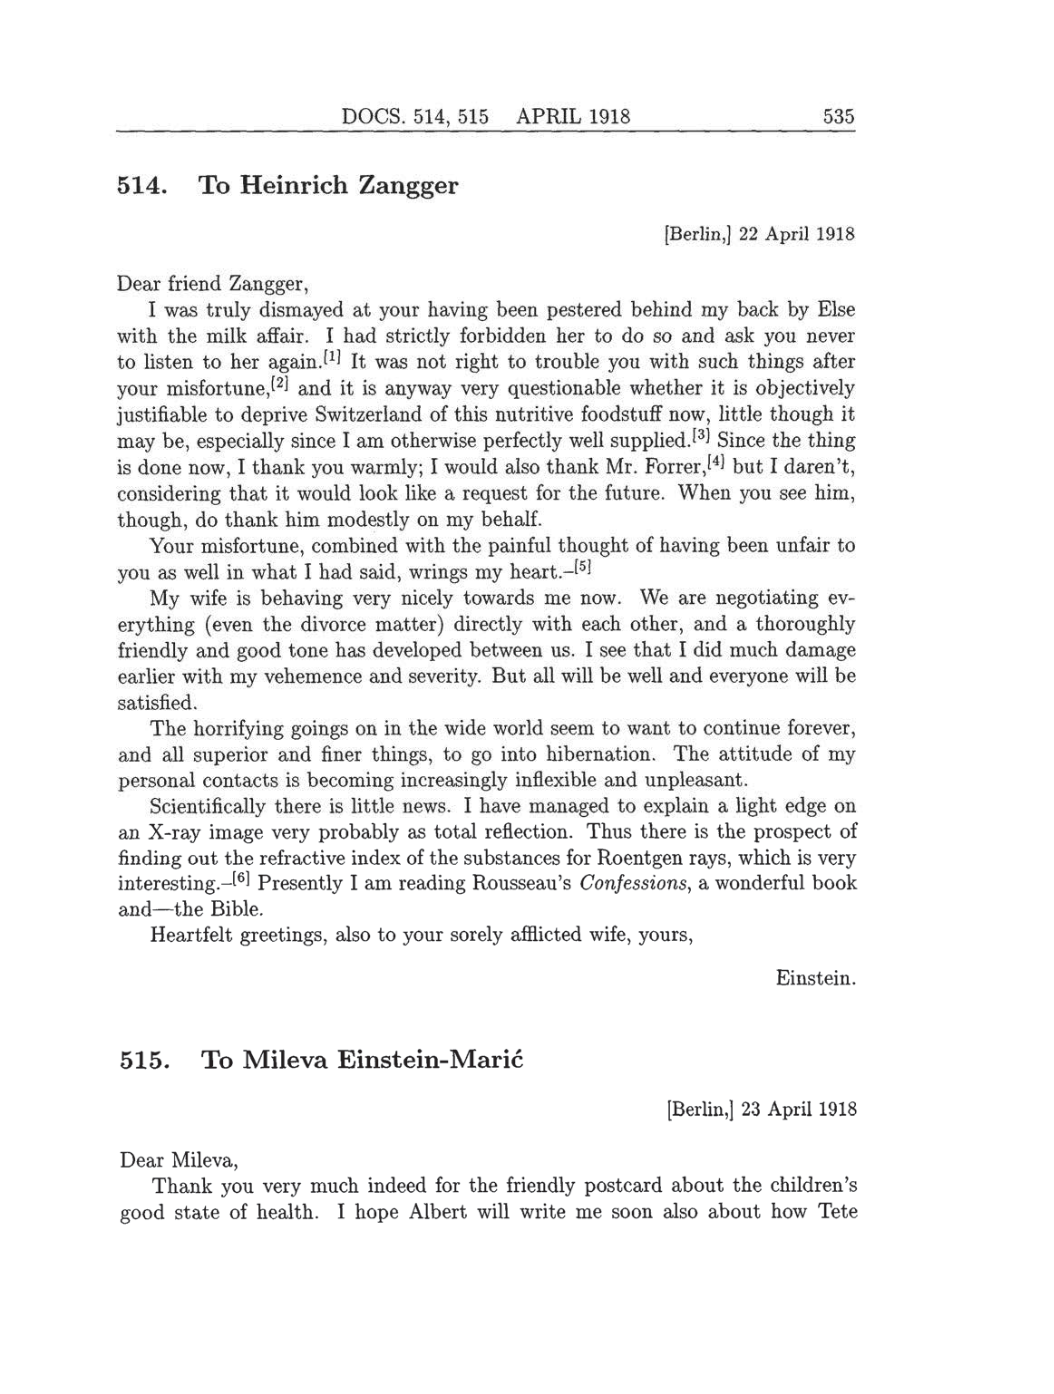 Volume 8: The Berlin Years: Correspondence, 1914-1918 (English translation supplement) page 535